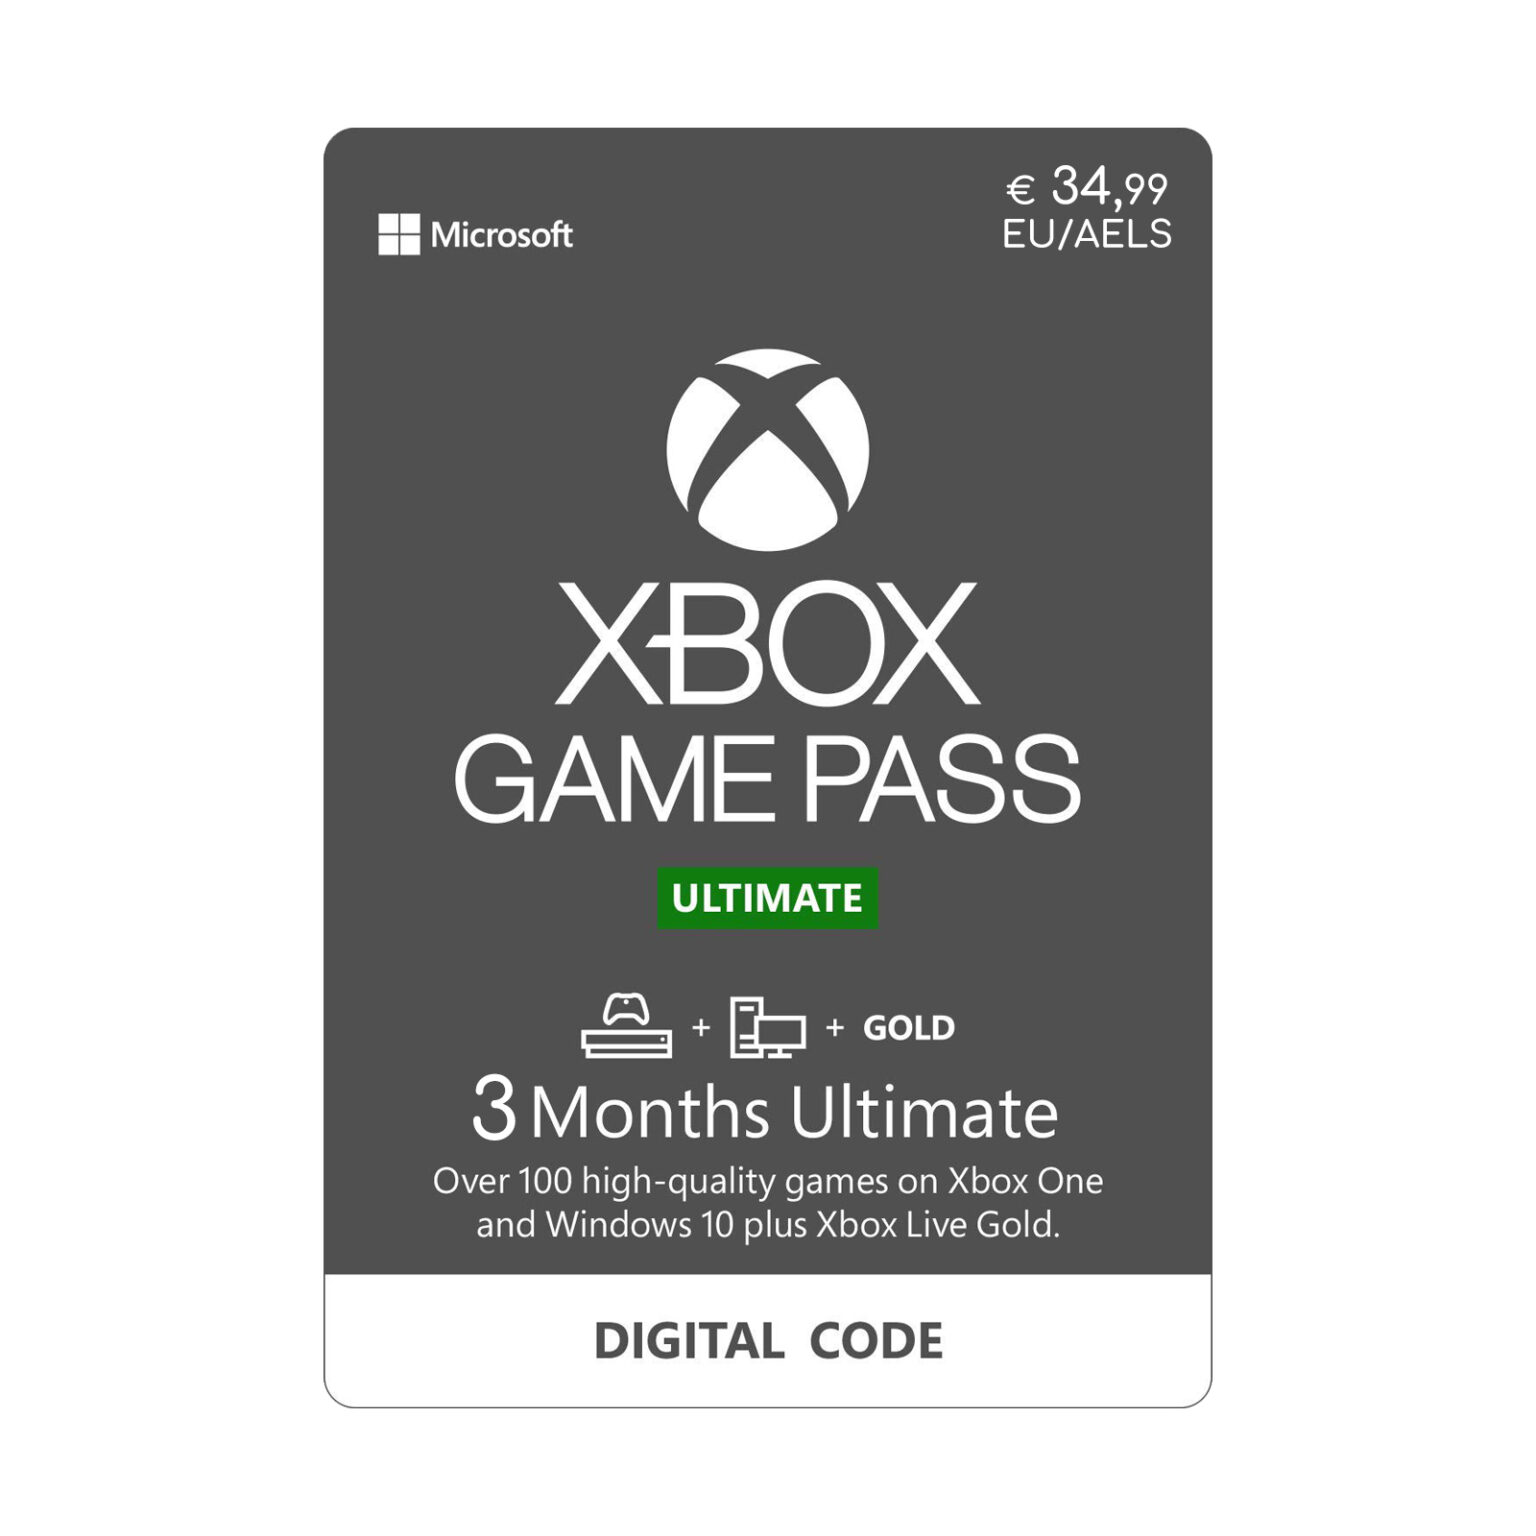 how much does game pass xbox cost